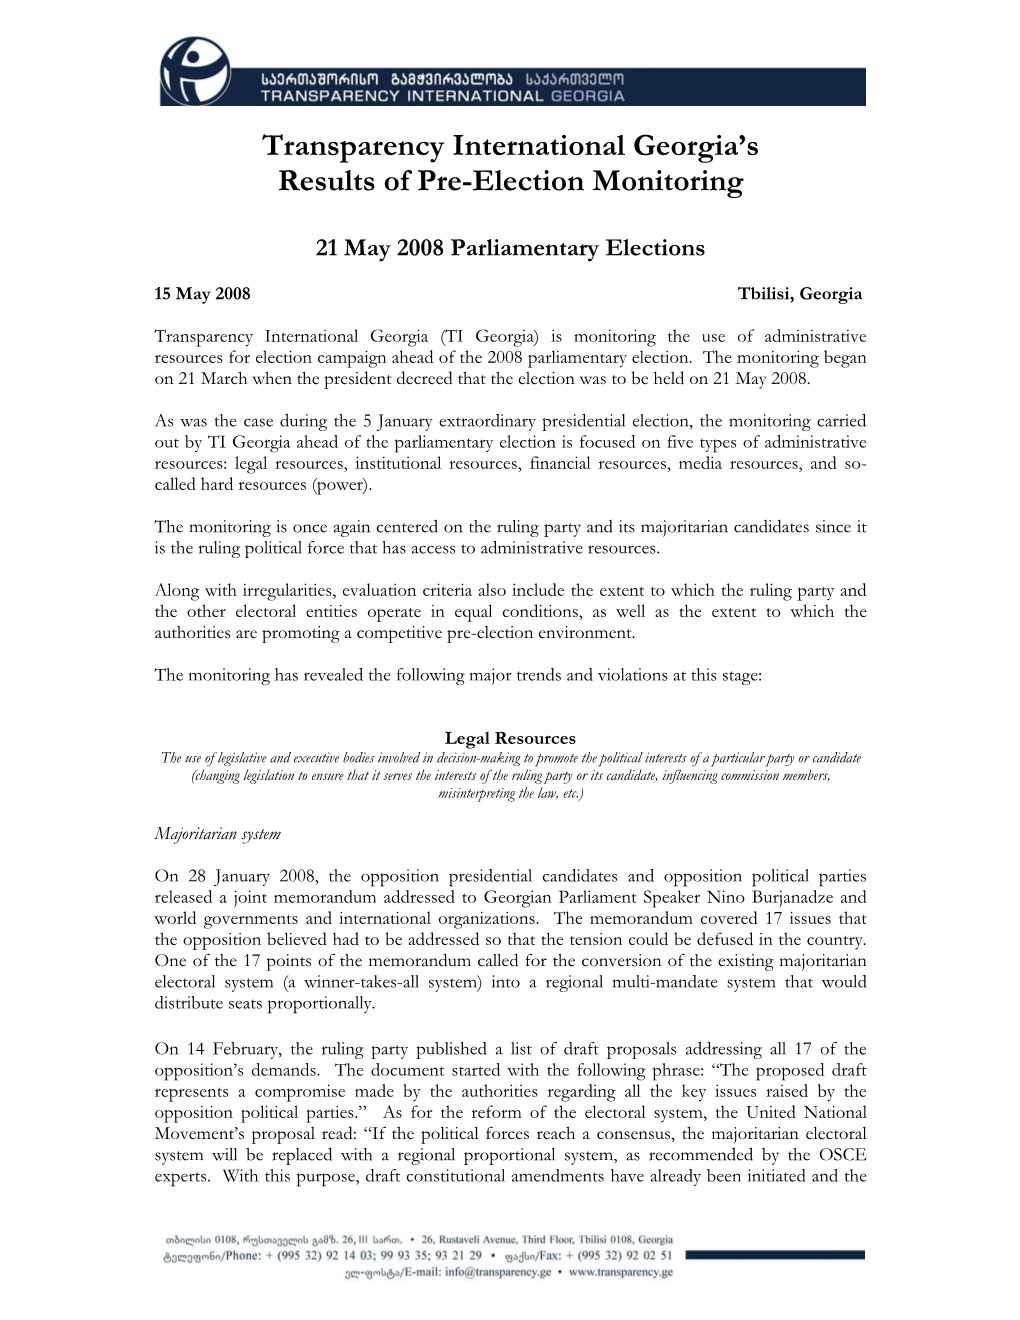 Transparency International Georgia's Results of Pre-Election Monitoring